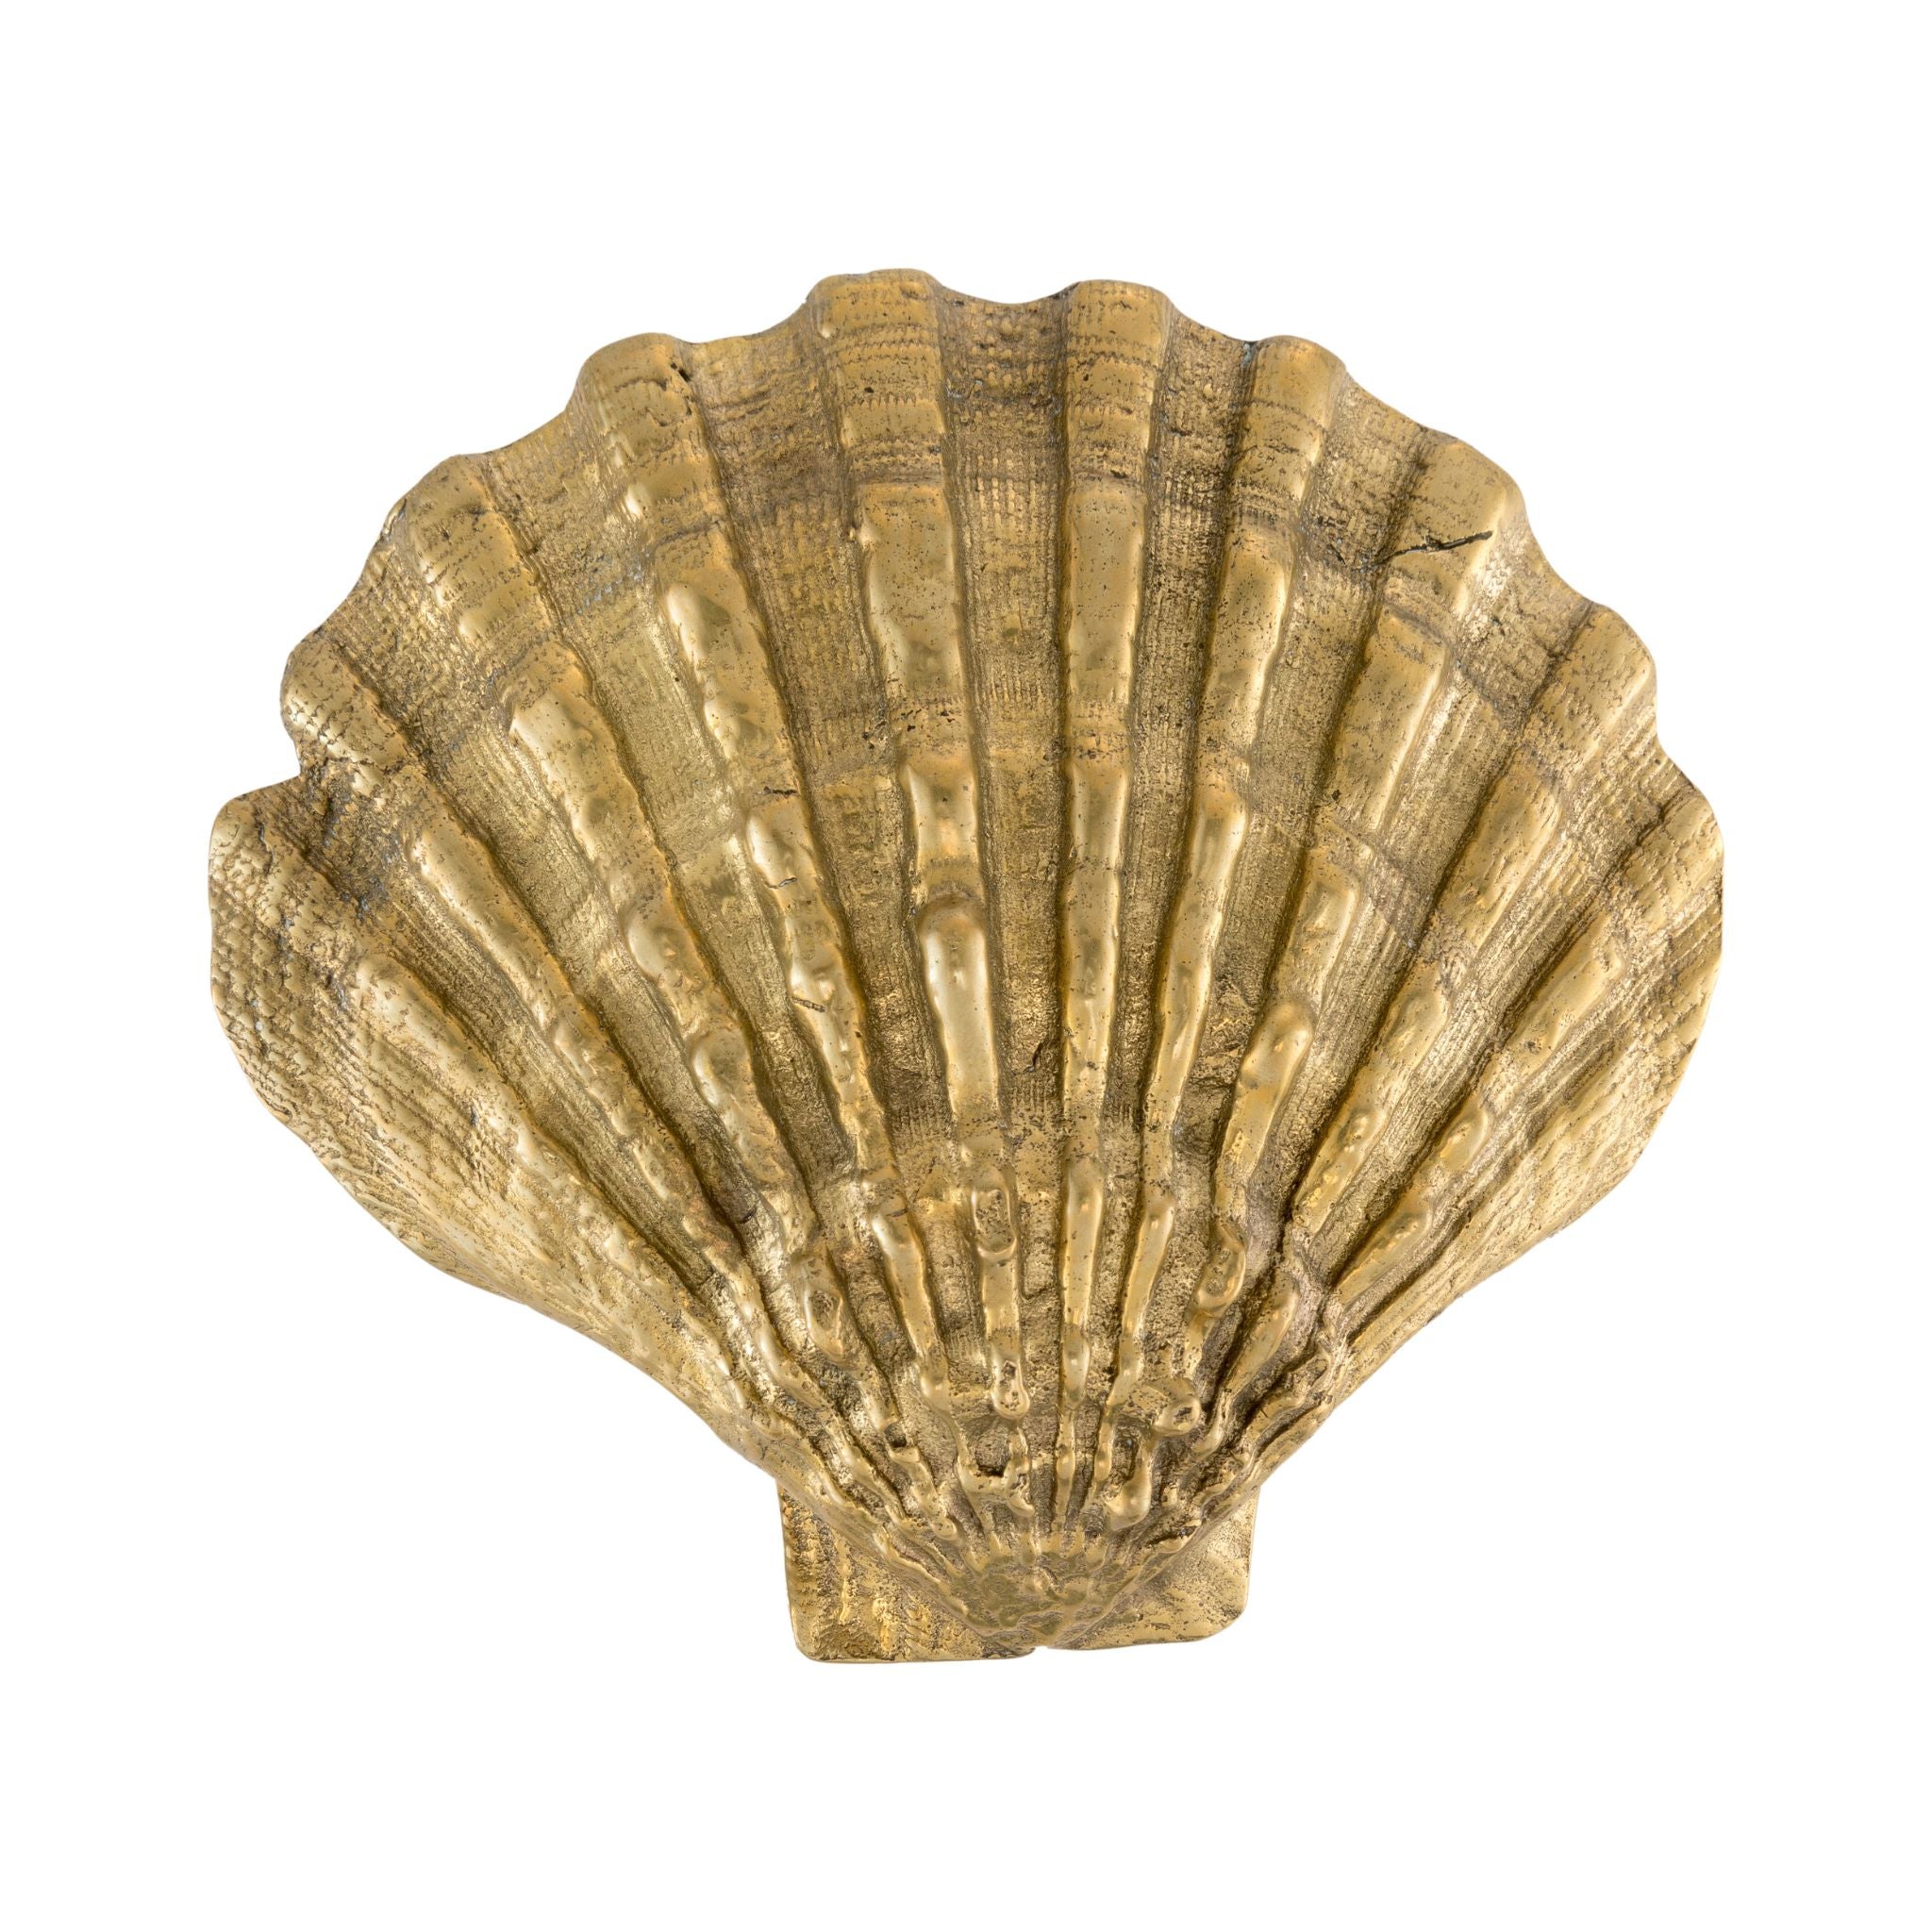 Brass cabinet knob designed in the shape of a seashell, ideal for adding a coastal touch to furniture and cabinets.